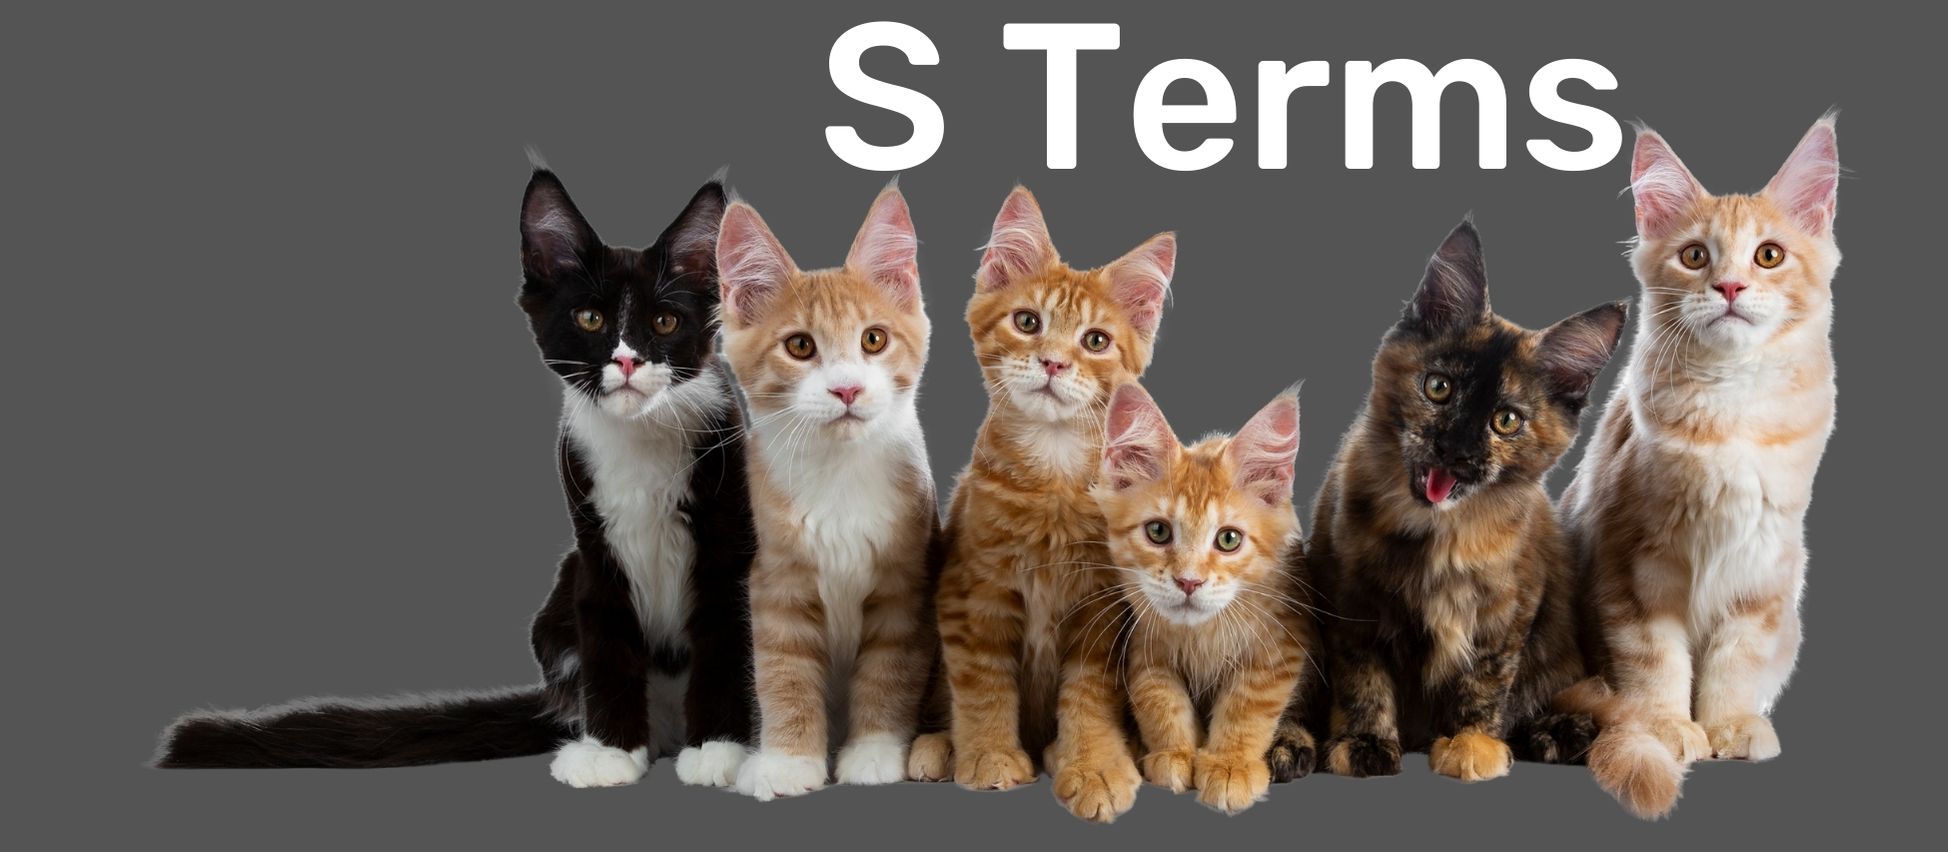 Group of six cats in front of a gray background with text reading 'S Terms' at the top to indicate a new section of the glossary